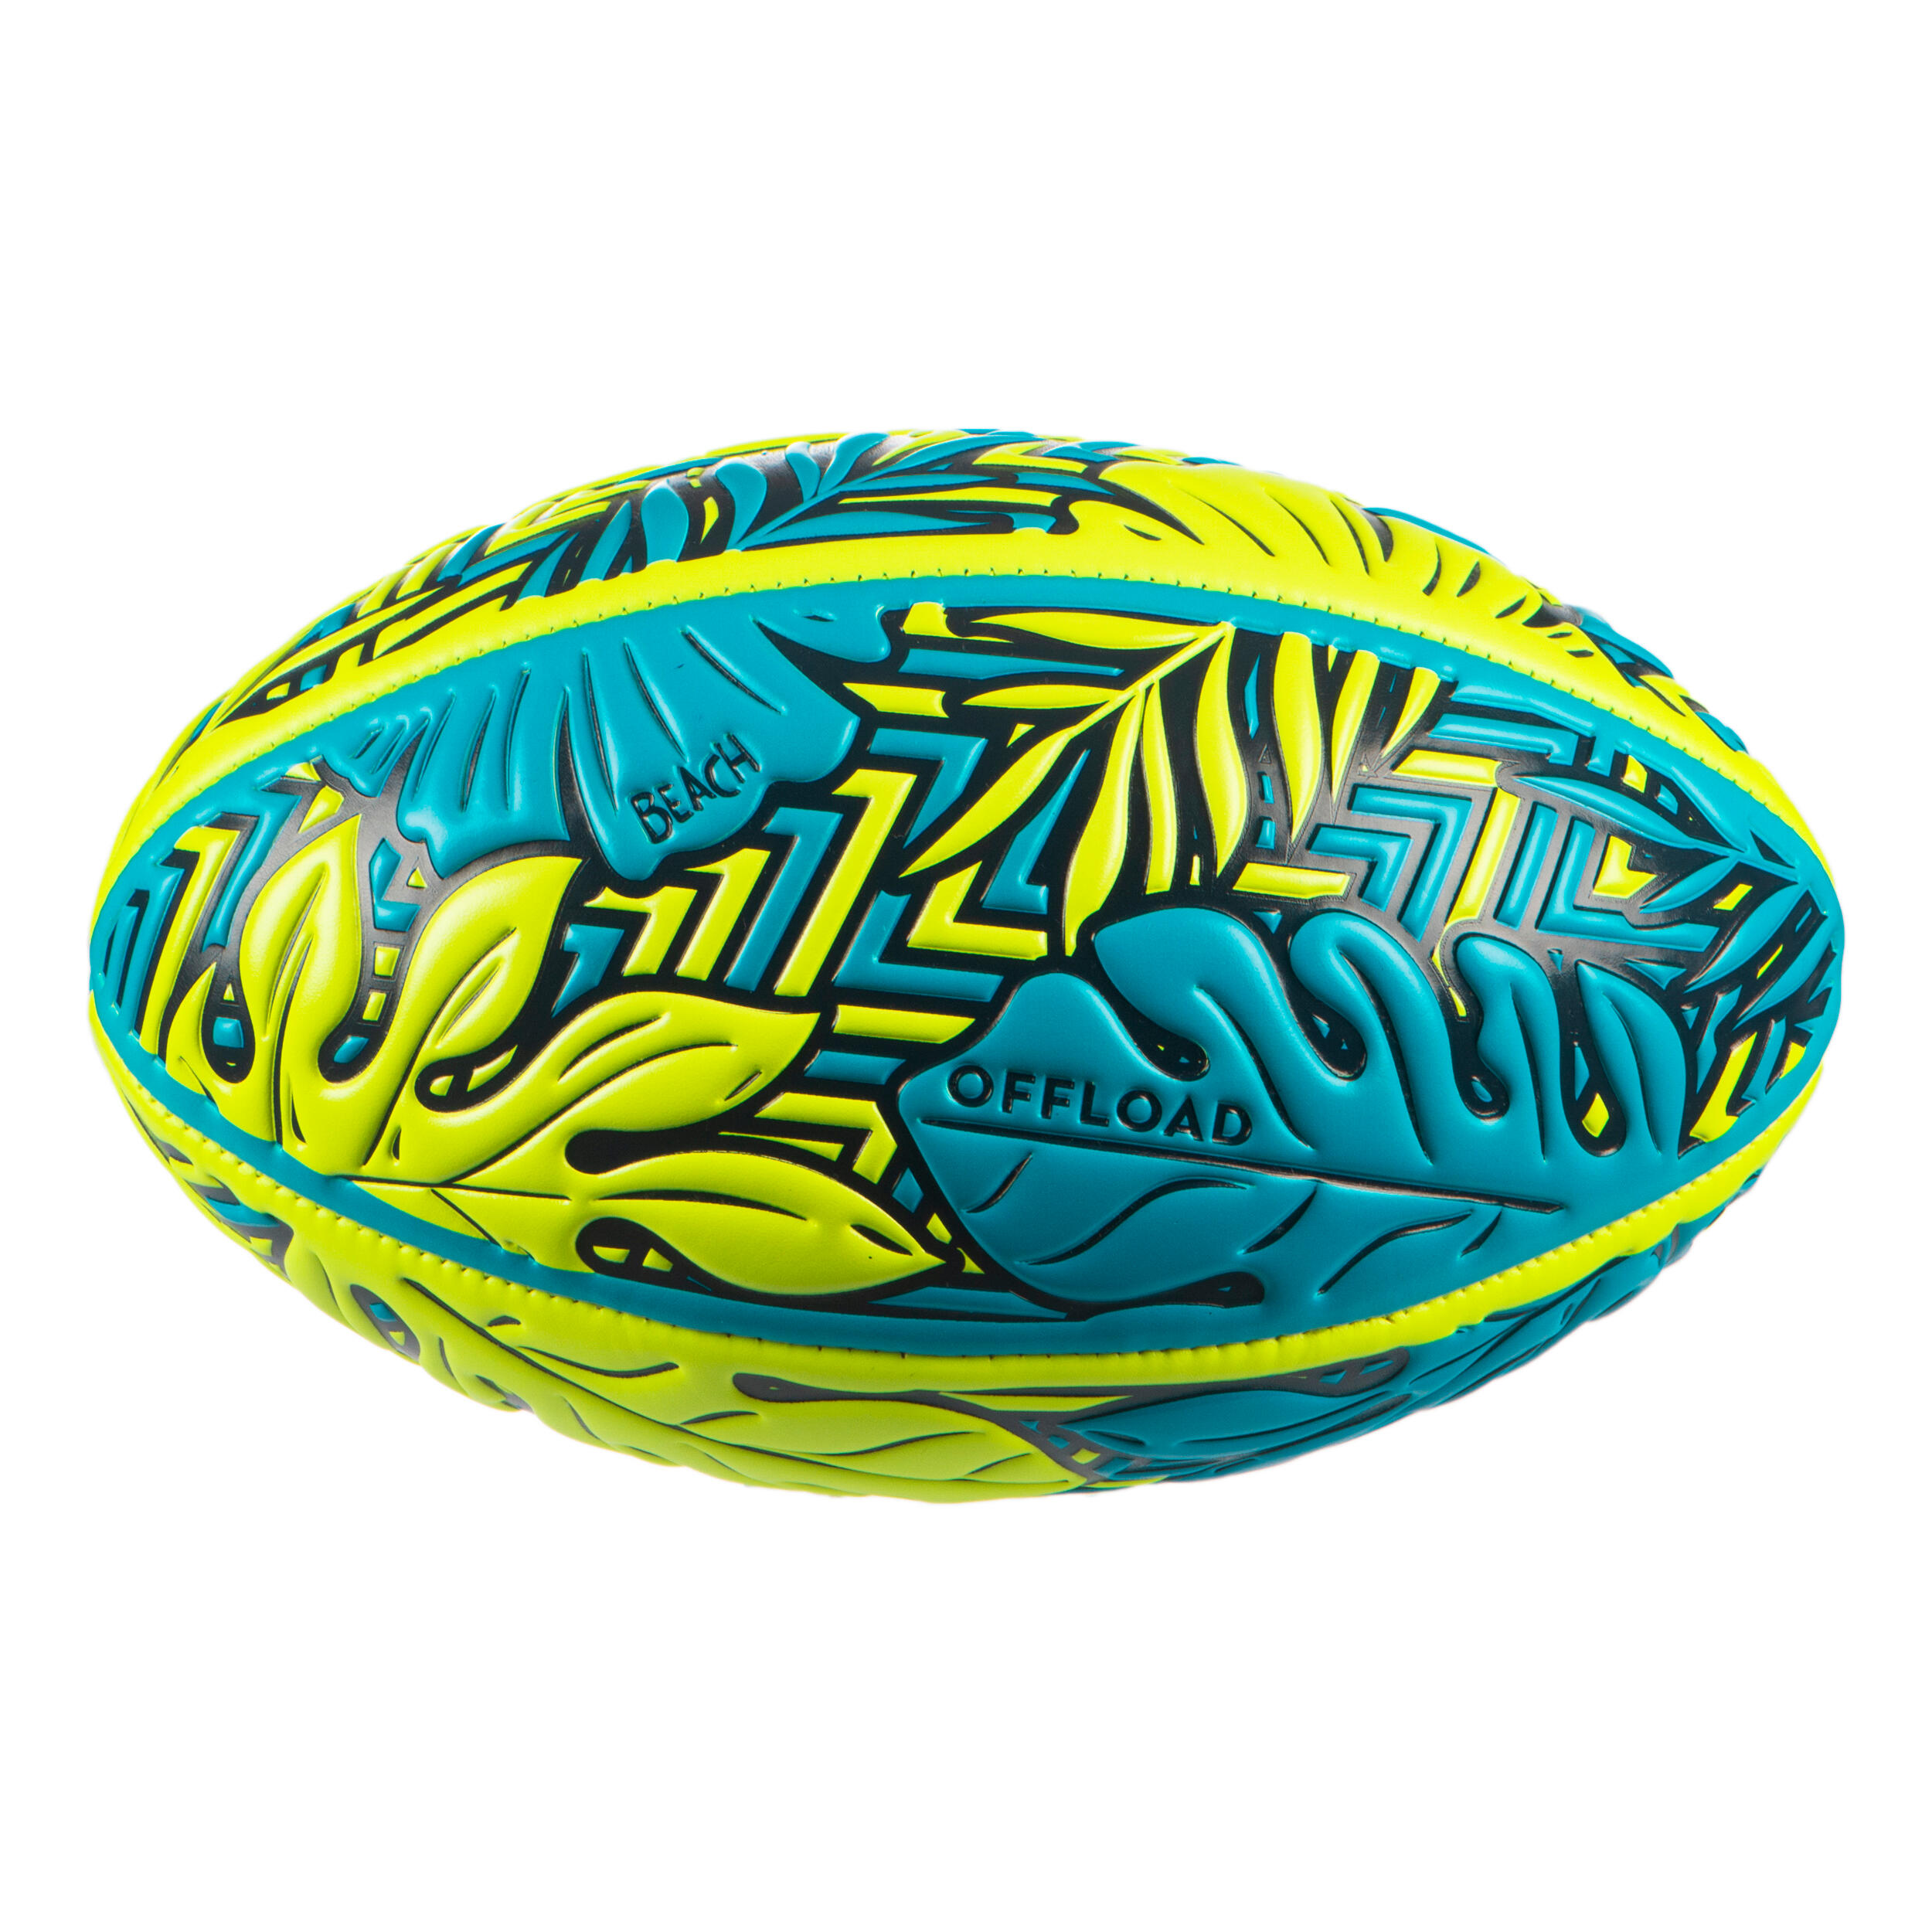 Fluorescence Yellow/Green Yellow Mitre Sabre Rugby Training Ball Size 3 